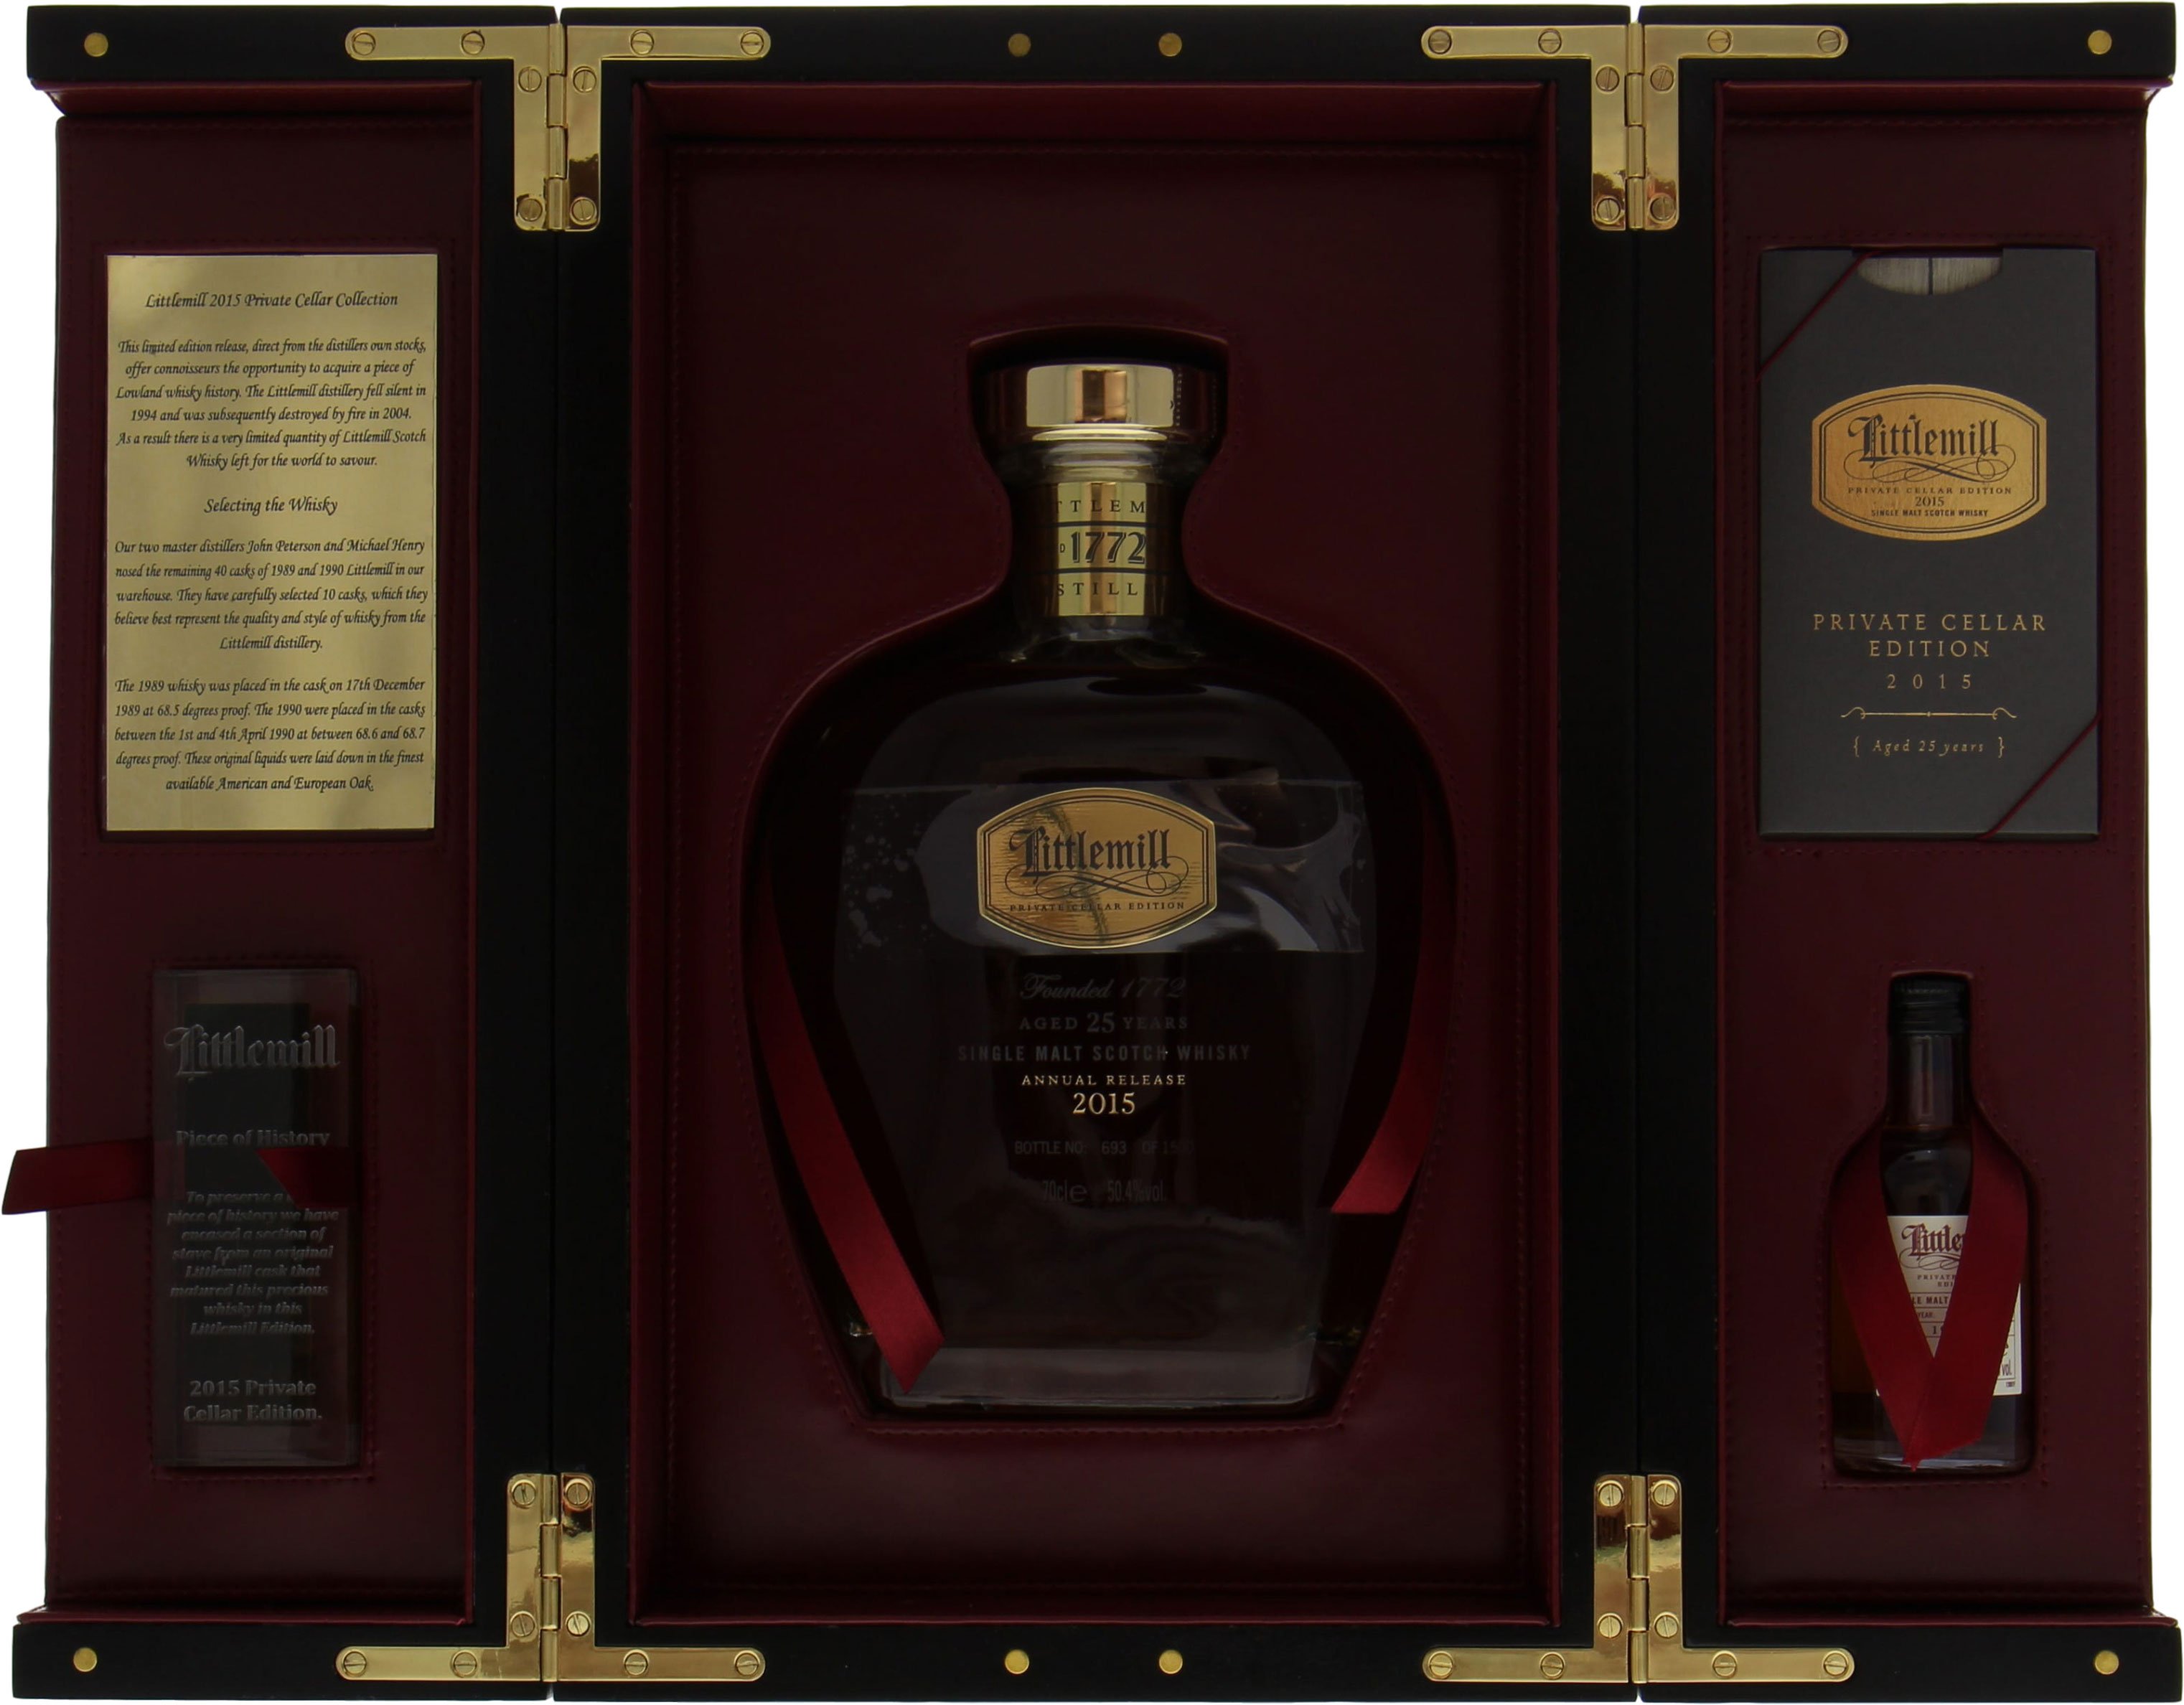 Littlemill - 25 Years Old Private Cellar Edition 50.4% NV